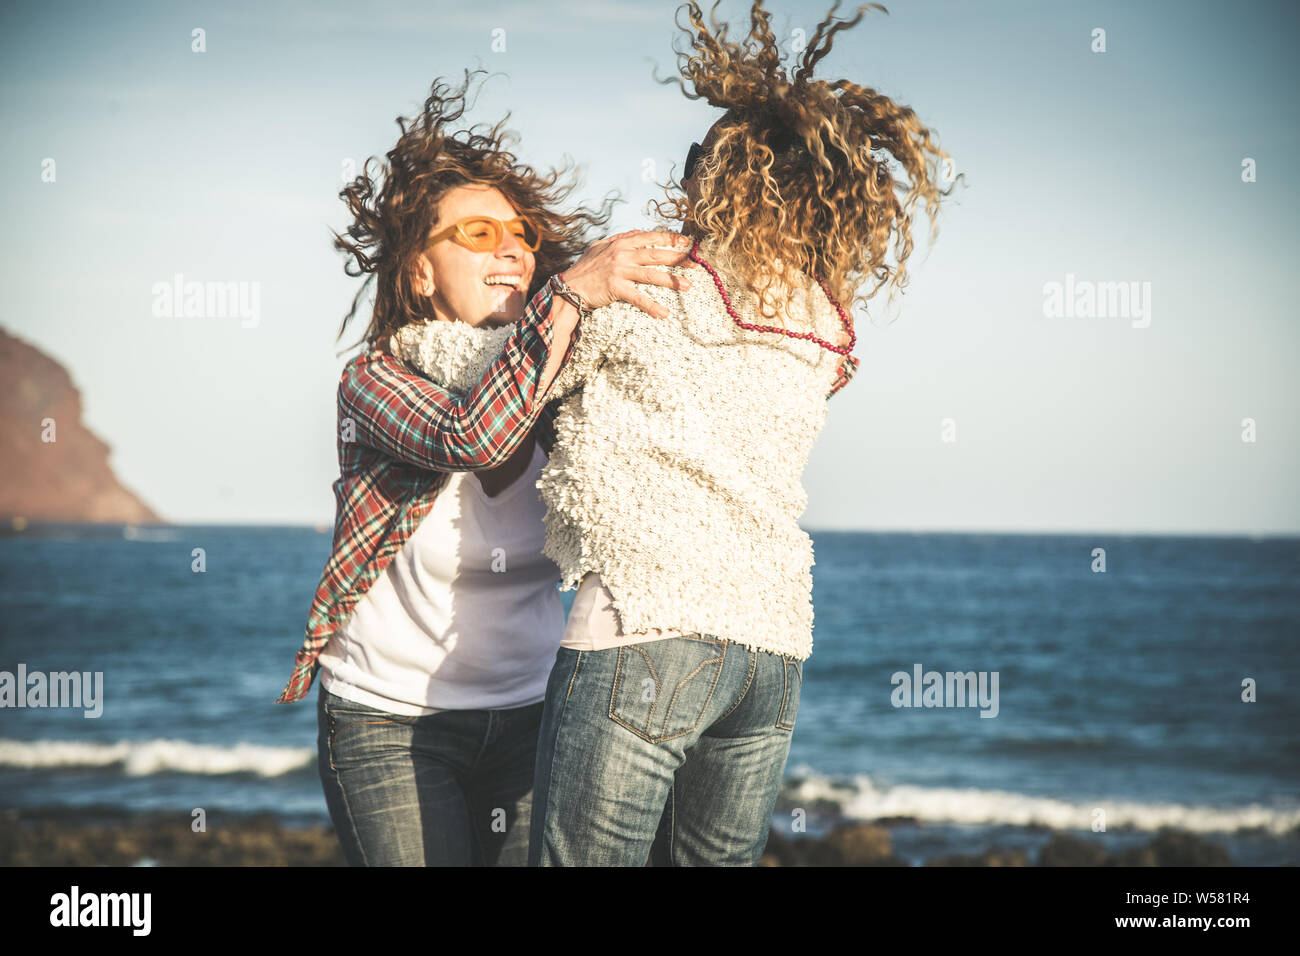 Friendship, summer vacation, freedom, happiness people concept - two happy female middle age friends they hug each other, dancing jumping beach. Full- Stock Photo